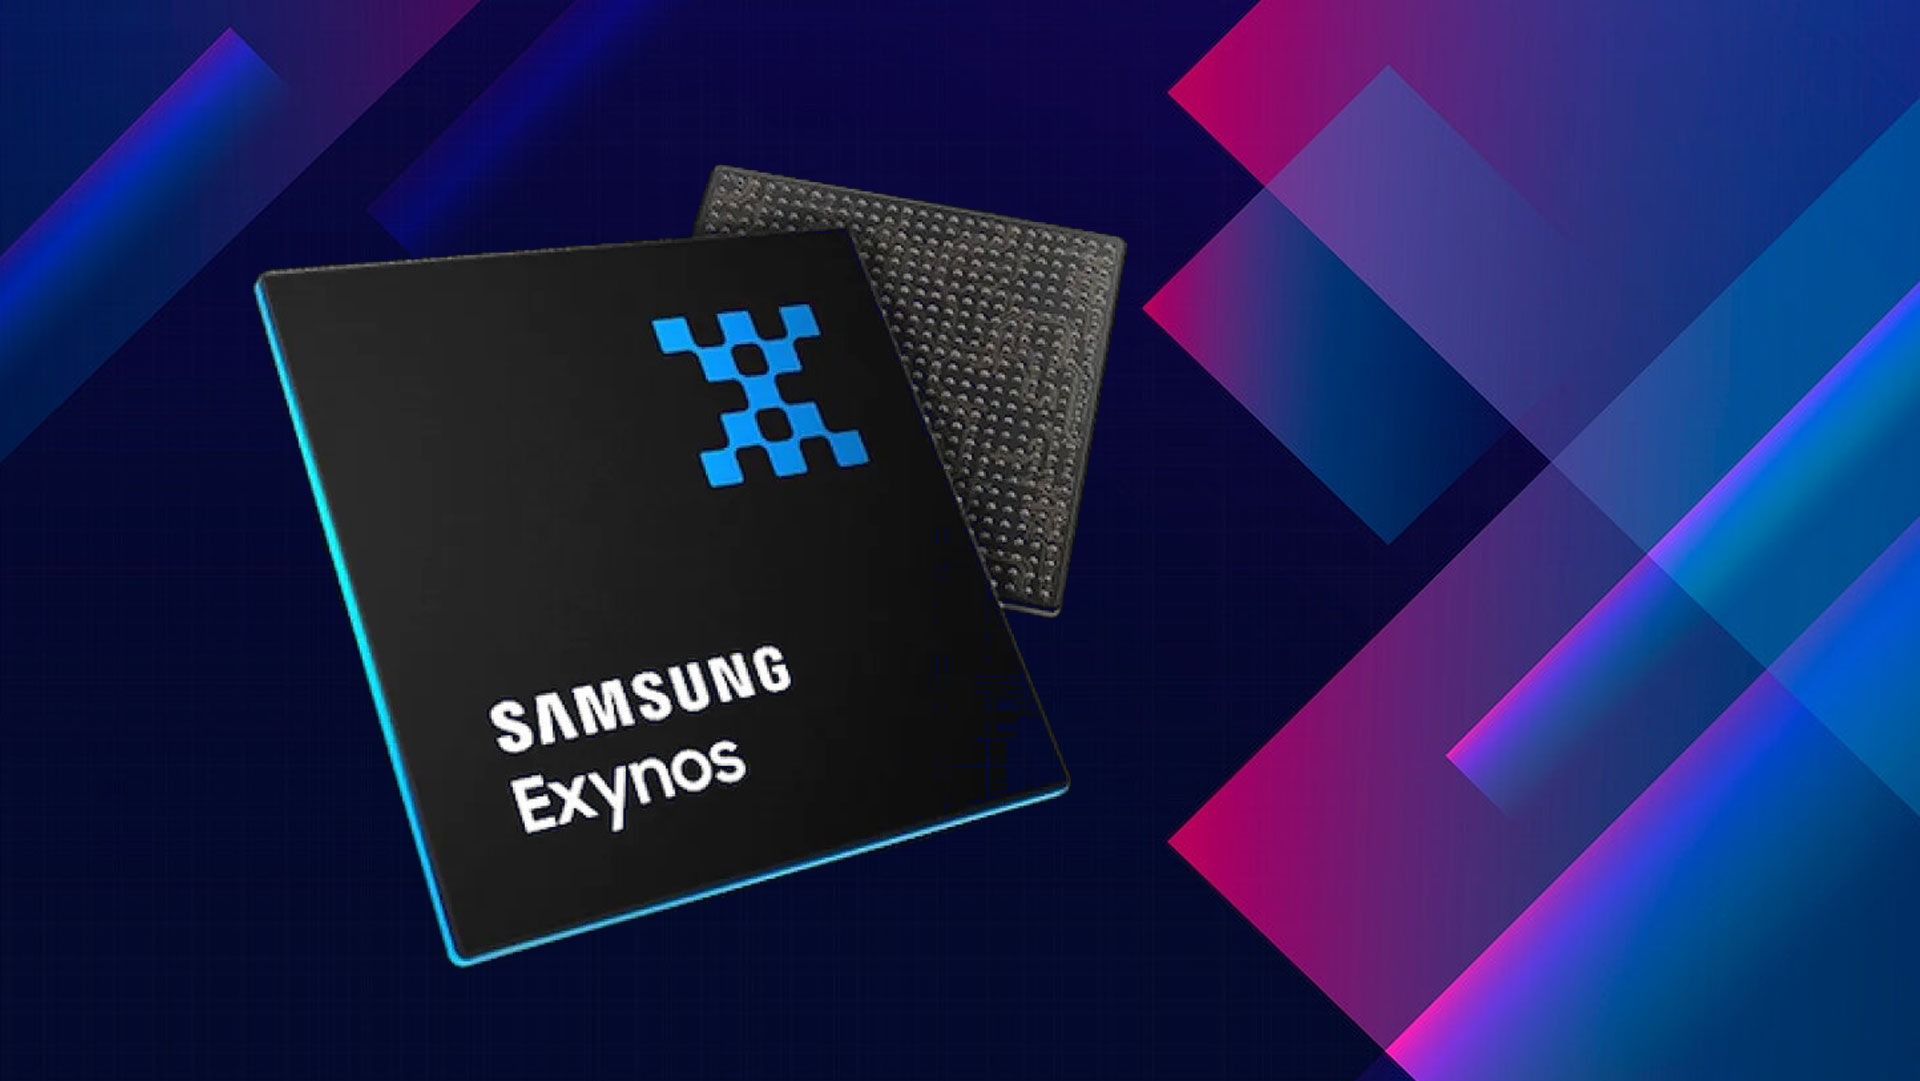 Samsung Partners with AMD to Enhance Image Processing in Mid-Range Exynos Chipsets